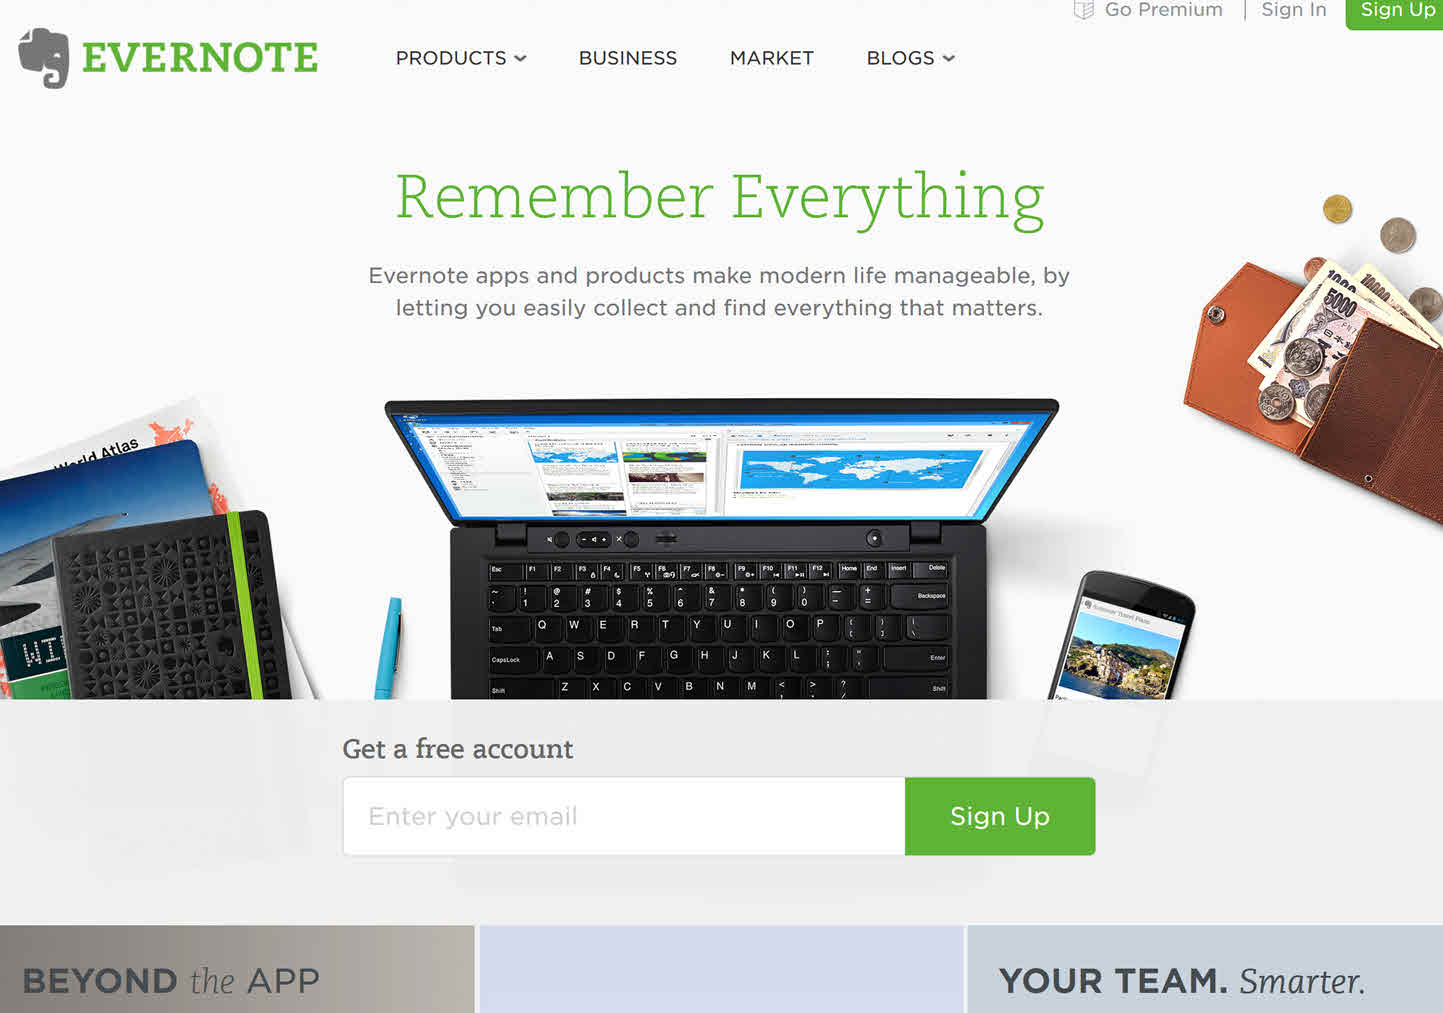 Evernote home page in 2013